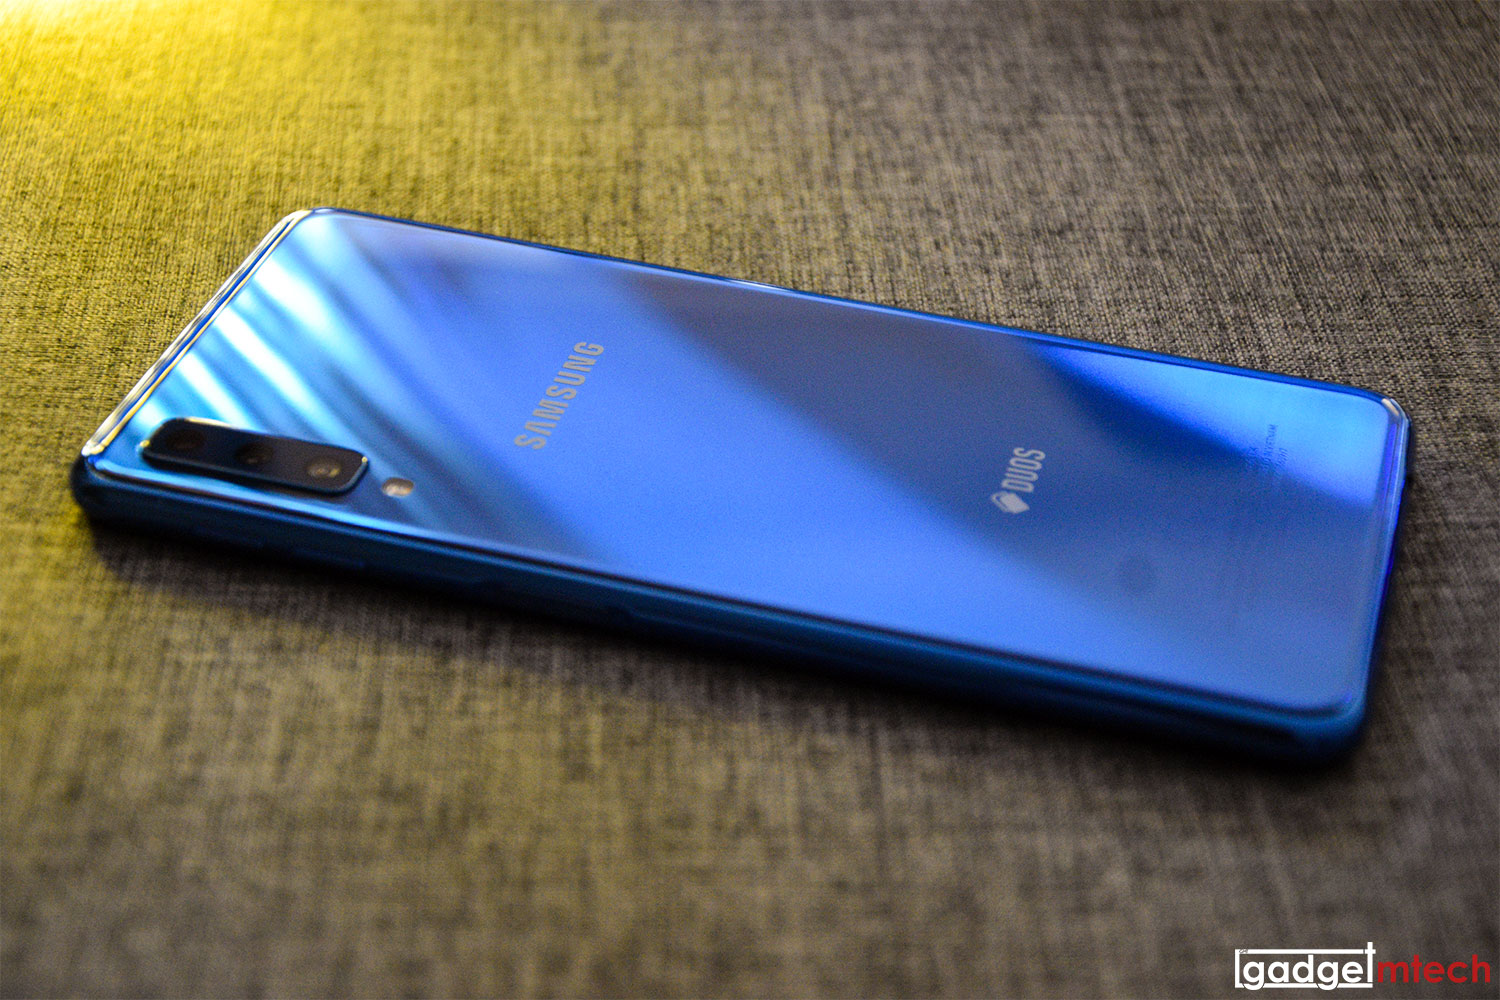 Samsung Galaxy A7 (2018) Review: Changes Arrived